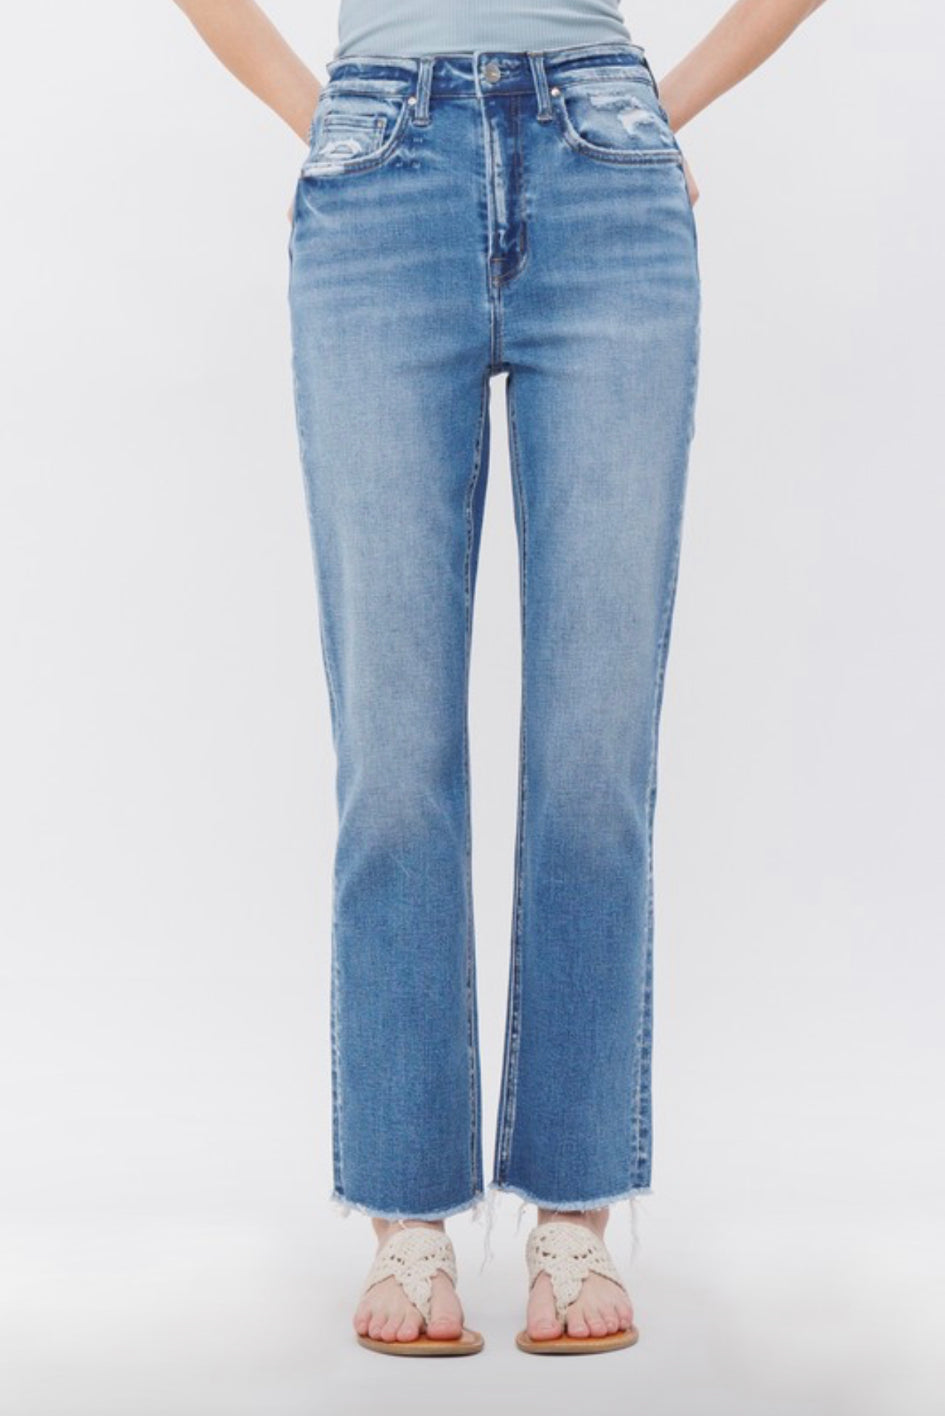 HIGH RISE JEANS - Style by me